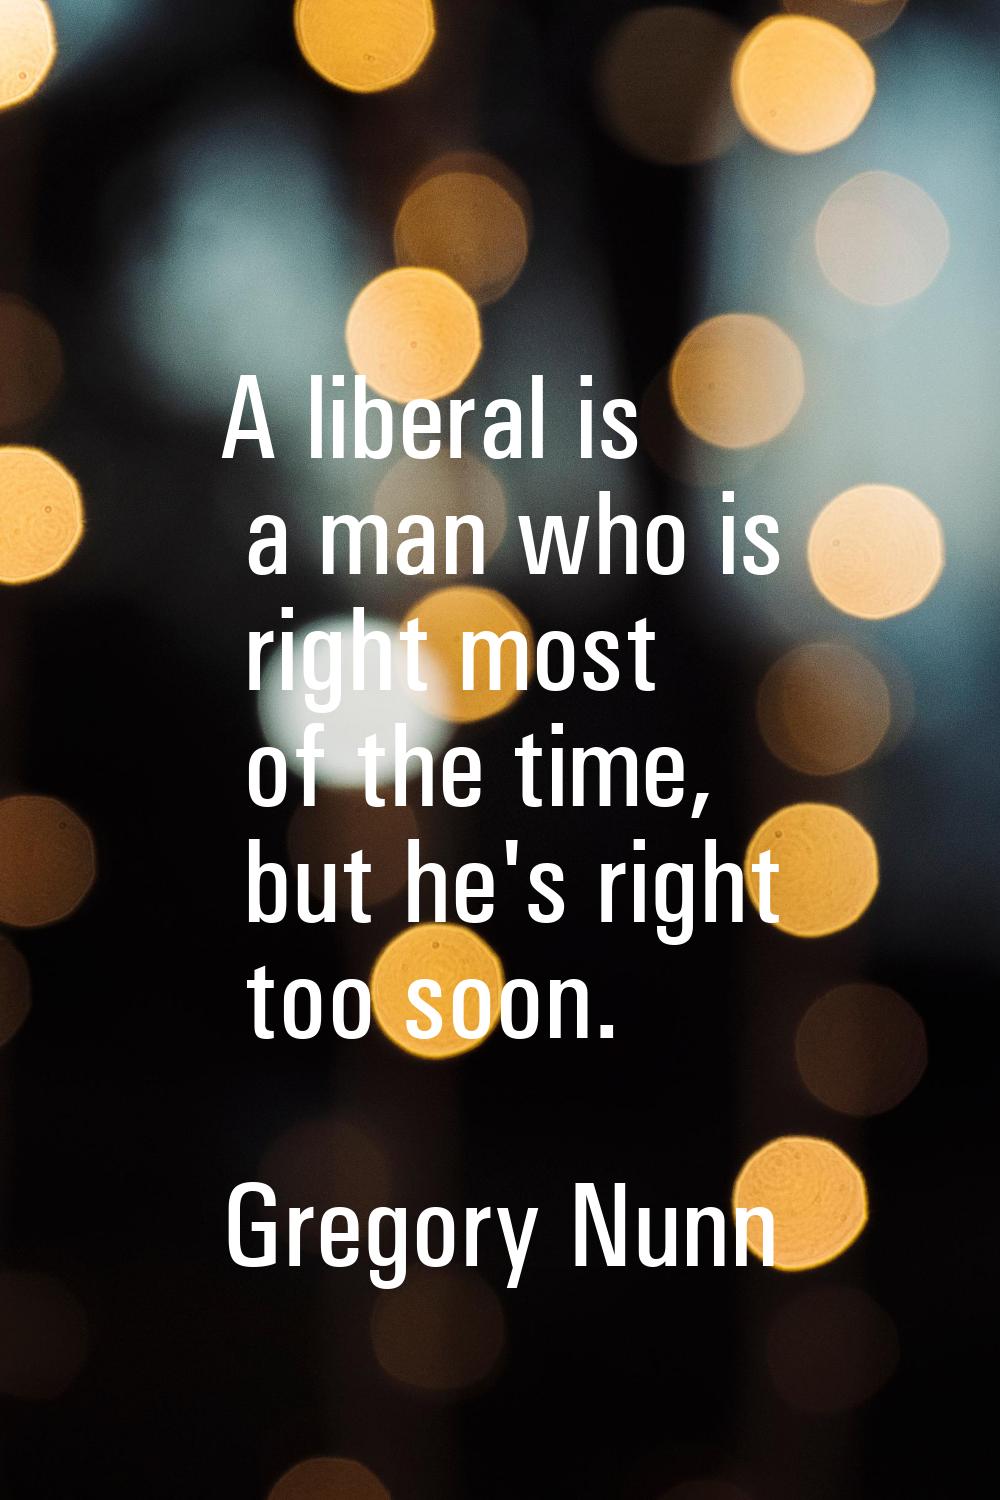 A liberal is a man who is right most of the time, but he's right too soon.